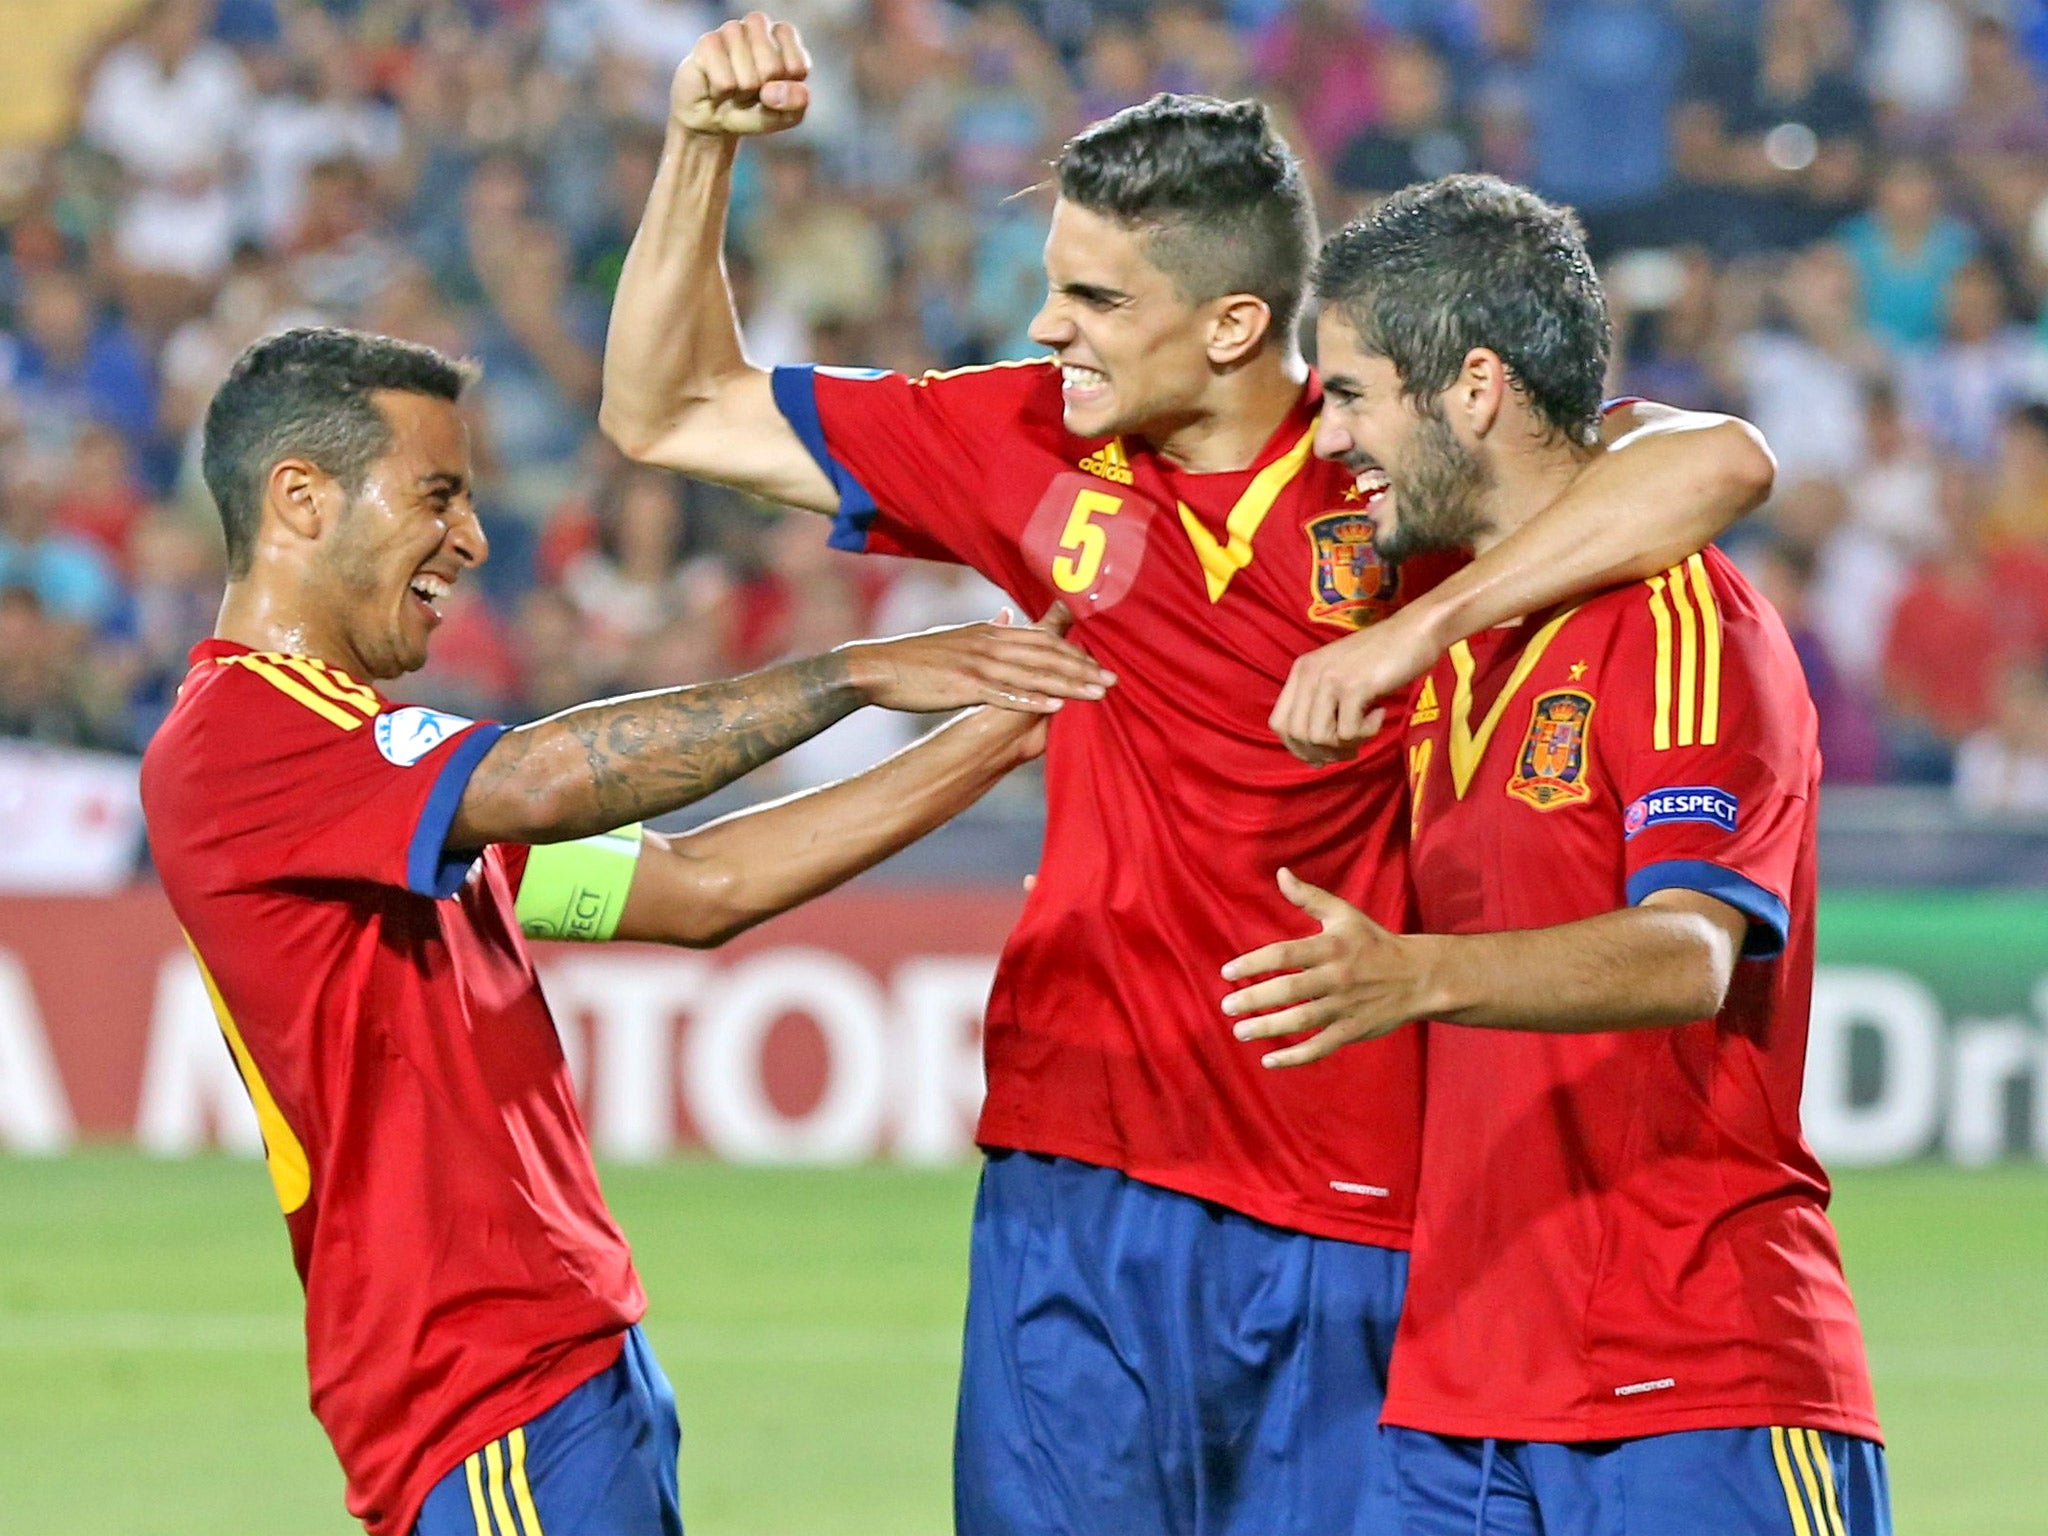 Isco (right) celebrates Spain's fourth goal with teammates Marc Bartra (centre) and Thiago, who scored the first three